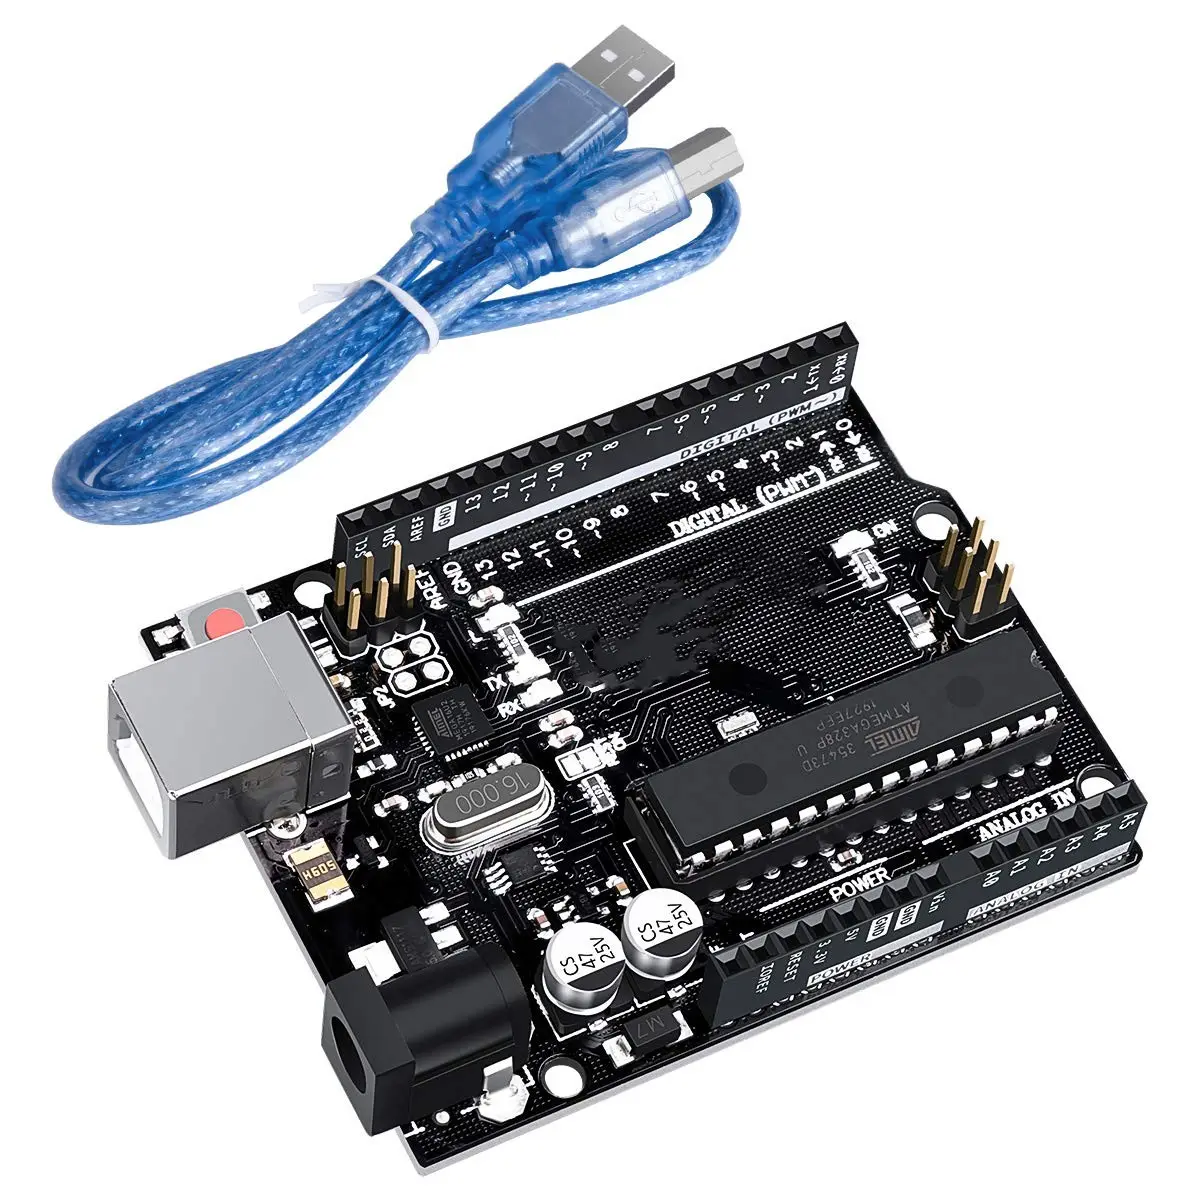 R3 Board ATmega328P with USB Cable(Arduino-Compatible) for Arduino